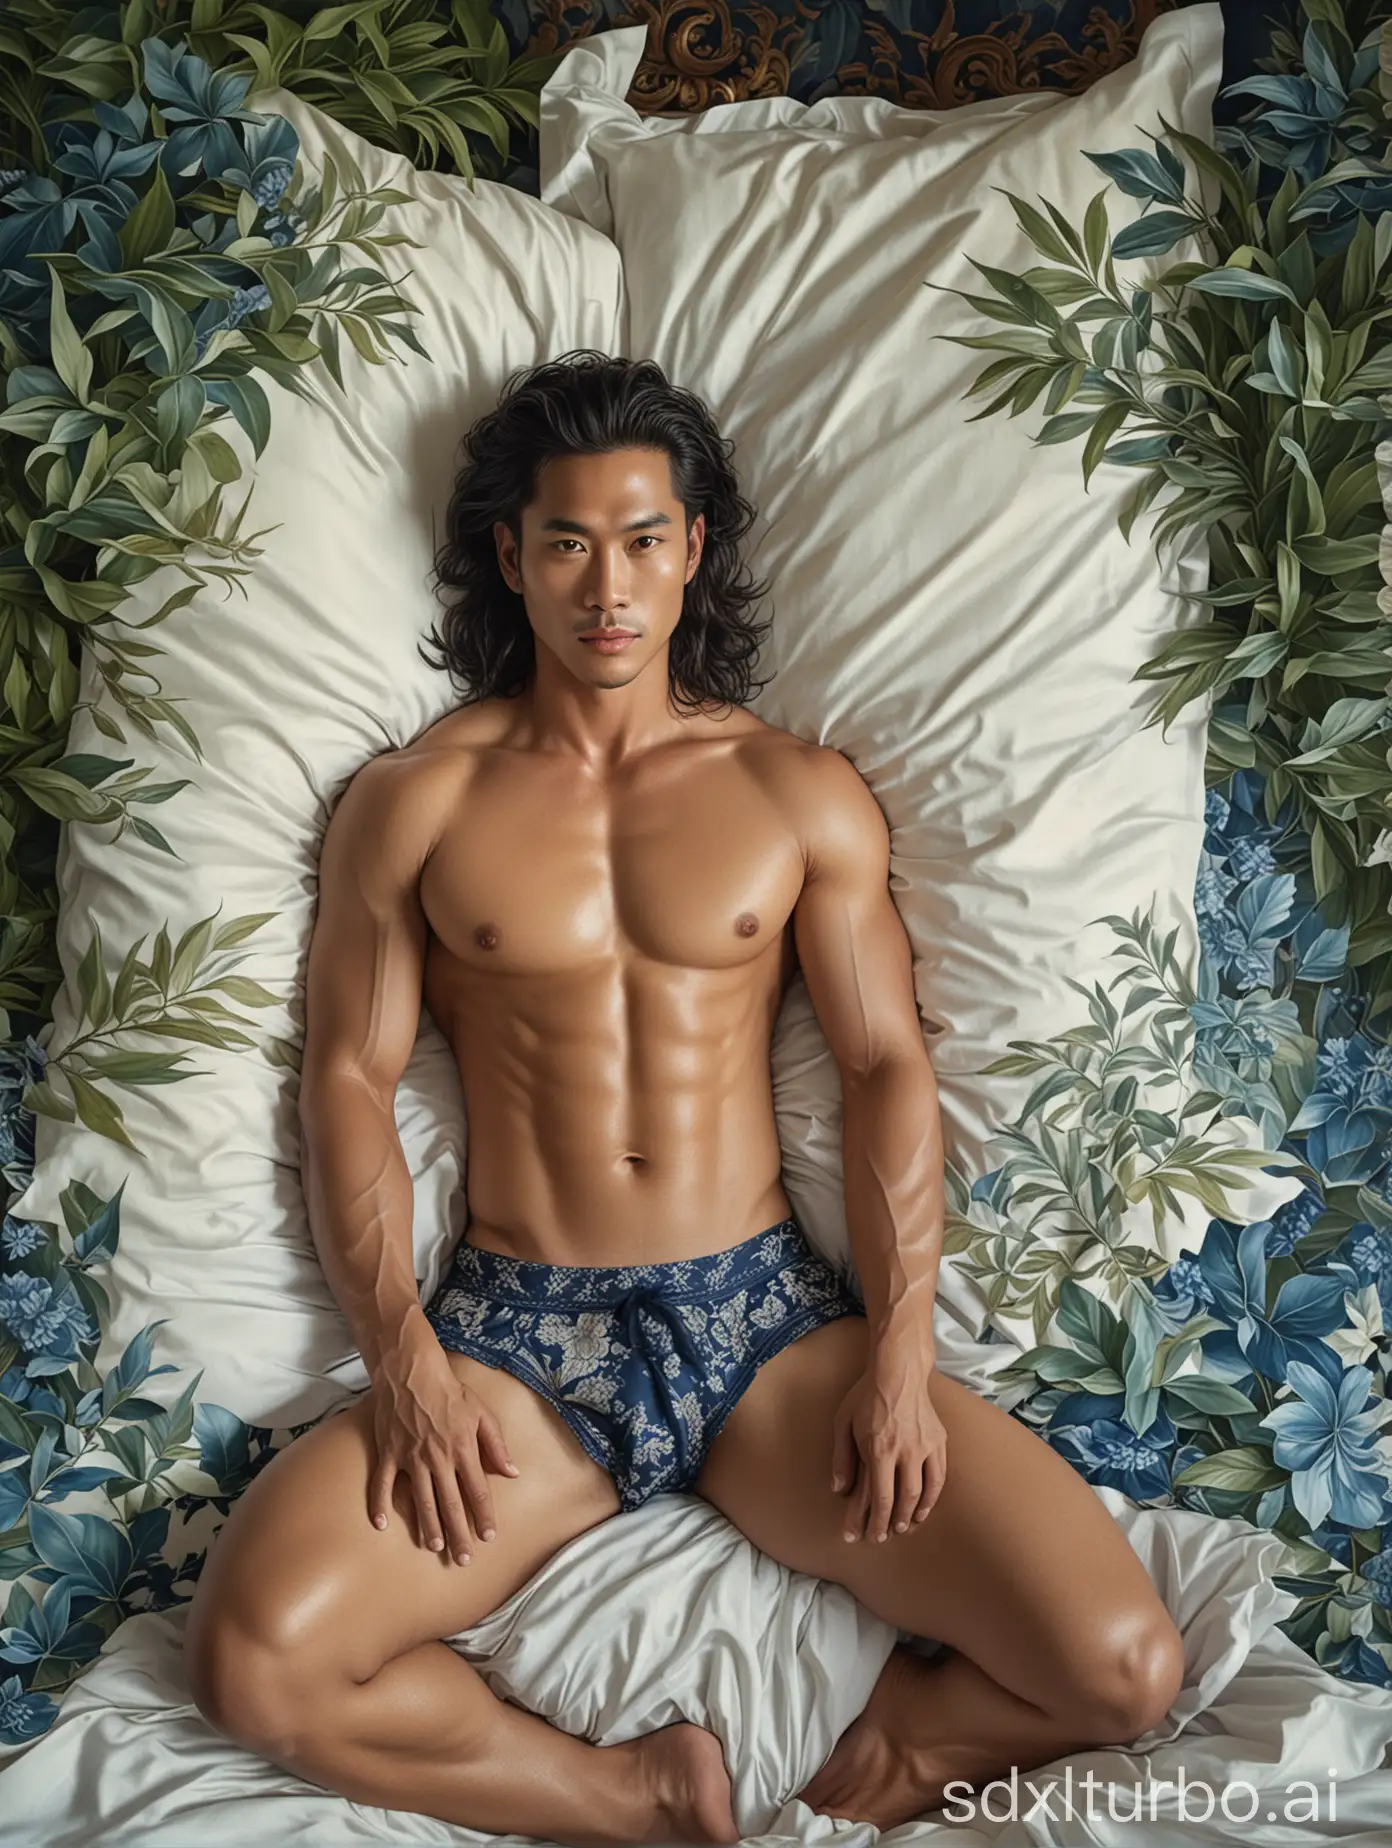 A portrait of a macho Thailand-Vietnam descent muscular royalty, with shoulder-lenght wavy hair, wearing traditional underwear, lying and sensually on the bed covered with blue foliage in the style of a painting by Leyendecker